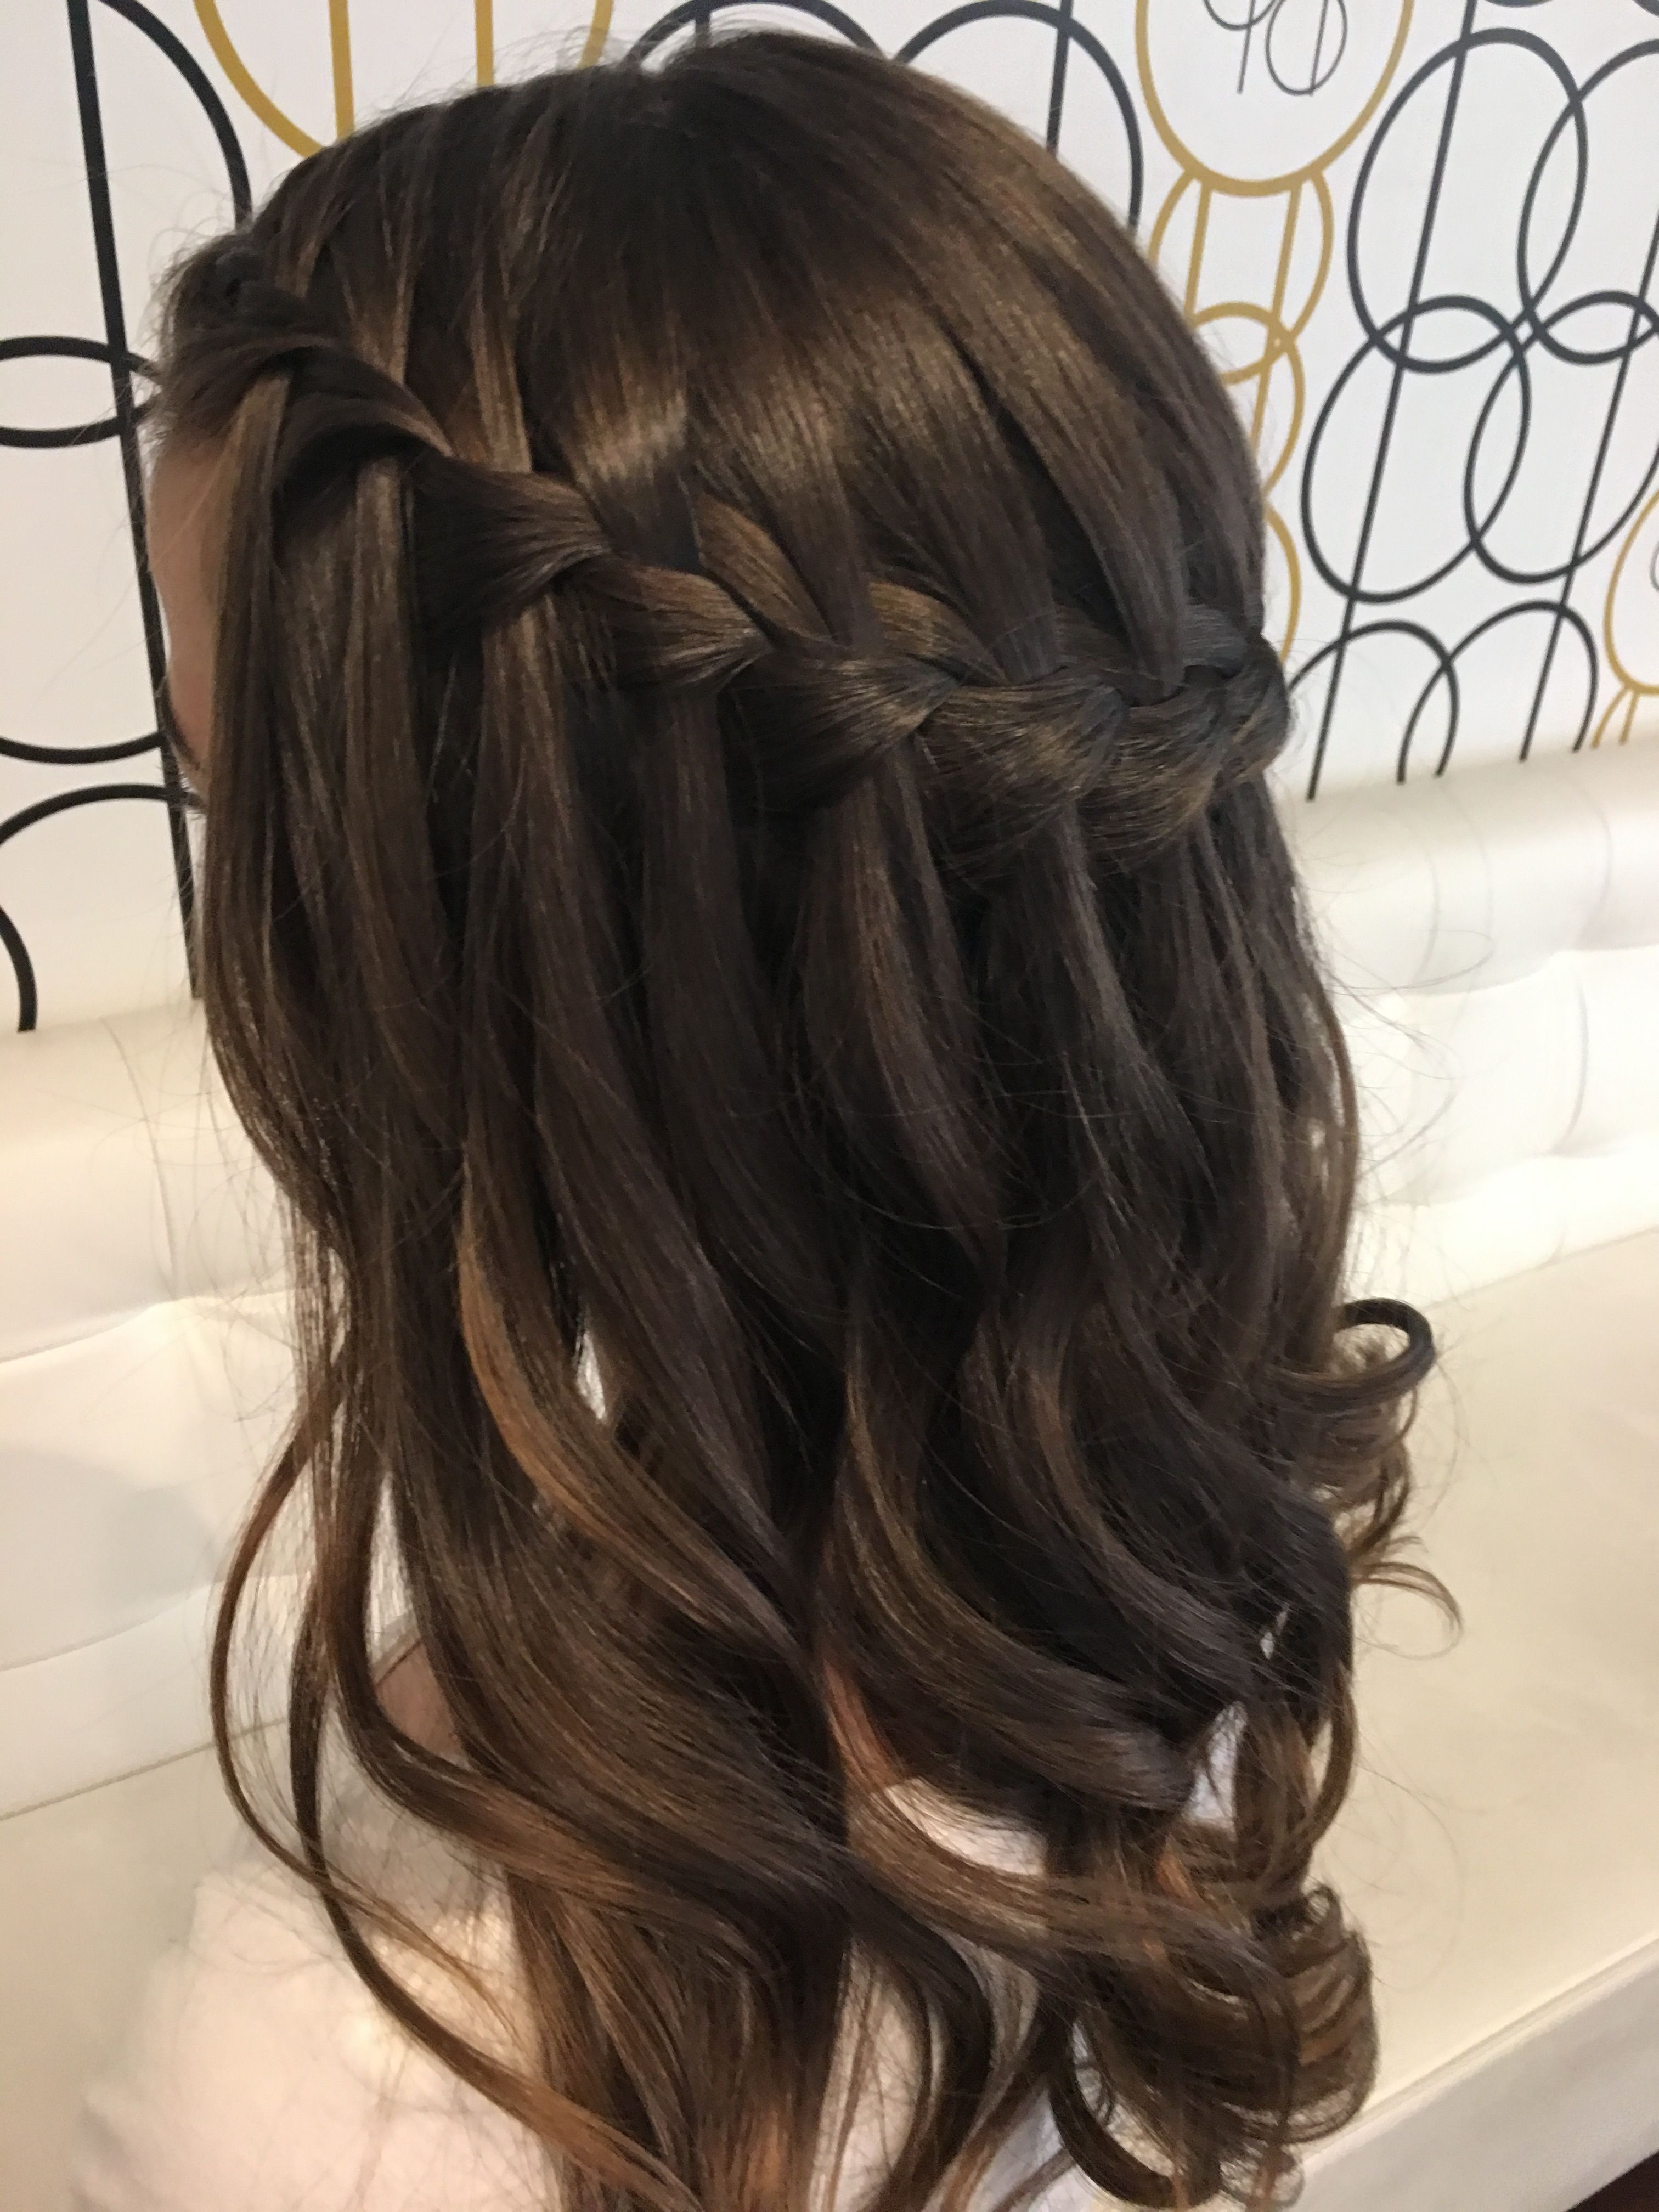 Prom Hair With 2018 Chic Waterfall Braid Prom Updos (View 4 of 20)